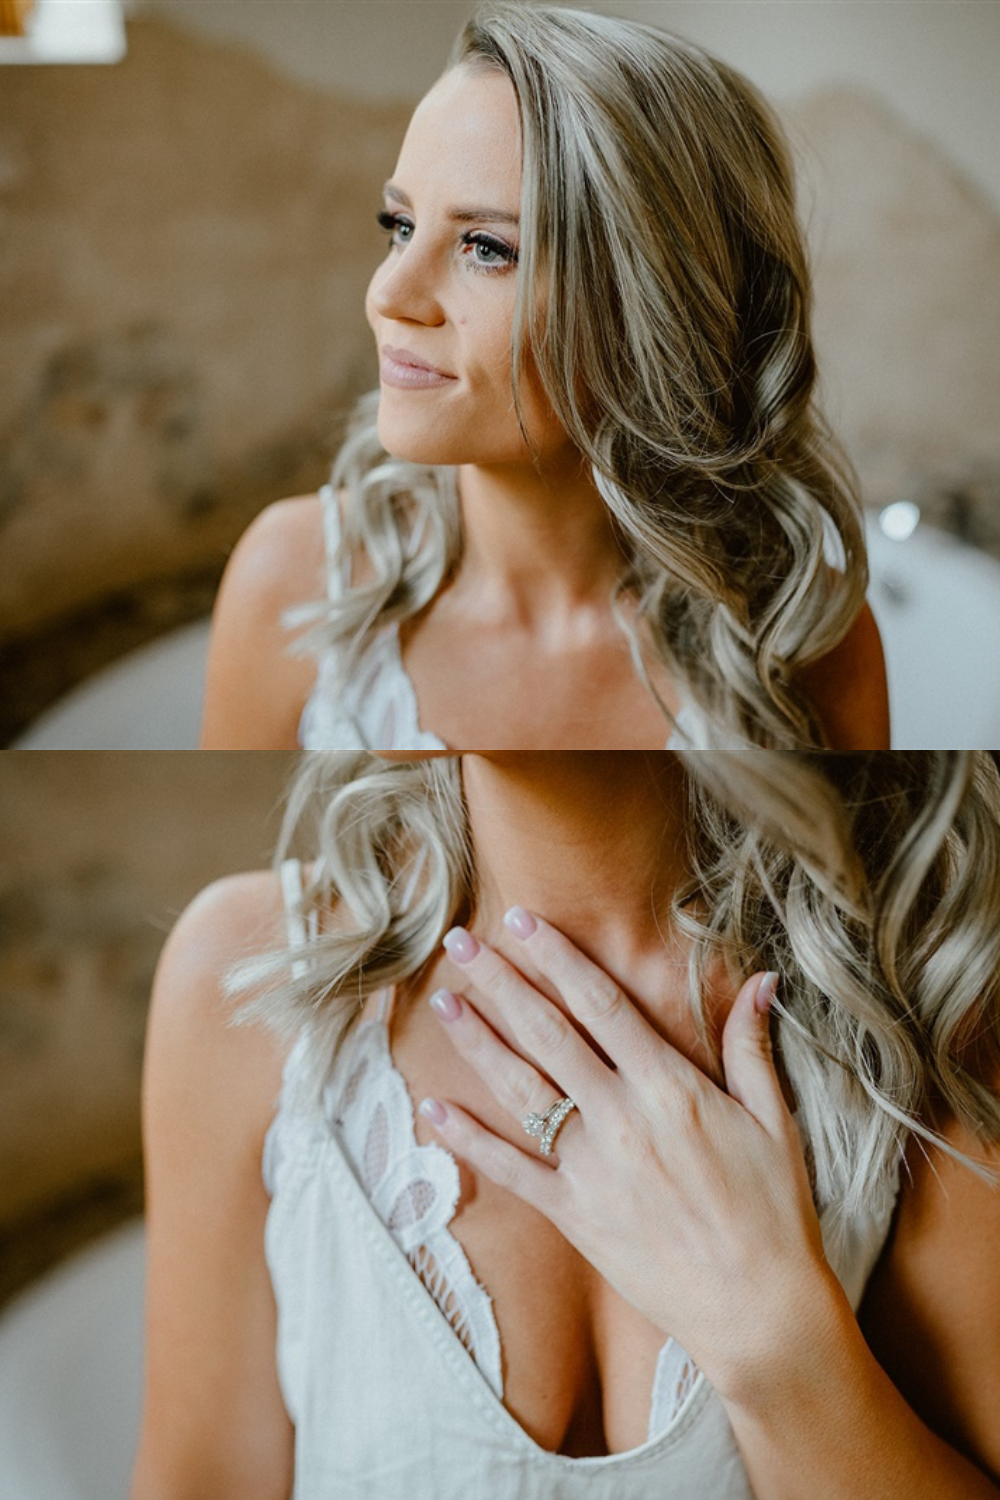 Bride smiles as she gets ready in her bride style with hair and make up inspiration for her Sun Rive and Smith Rock elopement in PNW | Sun River Elopement, Destination Elopement Photographer, Smith Rock Elopement Inspiration, Oregon Elopement ideas, PNW Fall Wedding Inspiration, Fall Outdoor Wedding Ideas,Fall Wedding Inspiration, PNW Outdoor Wedding Ideas | chelseaabril.com